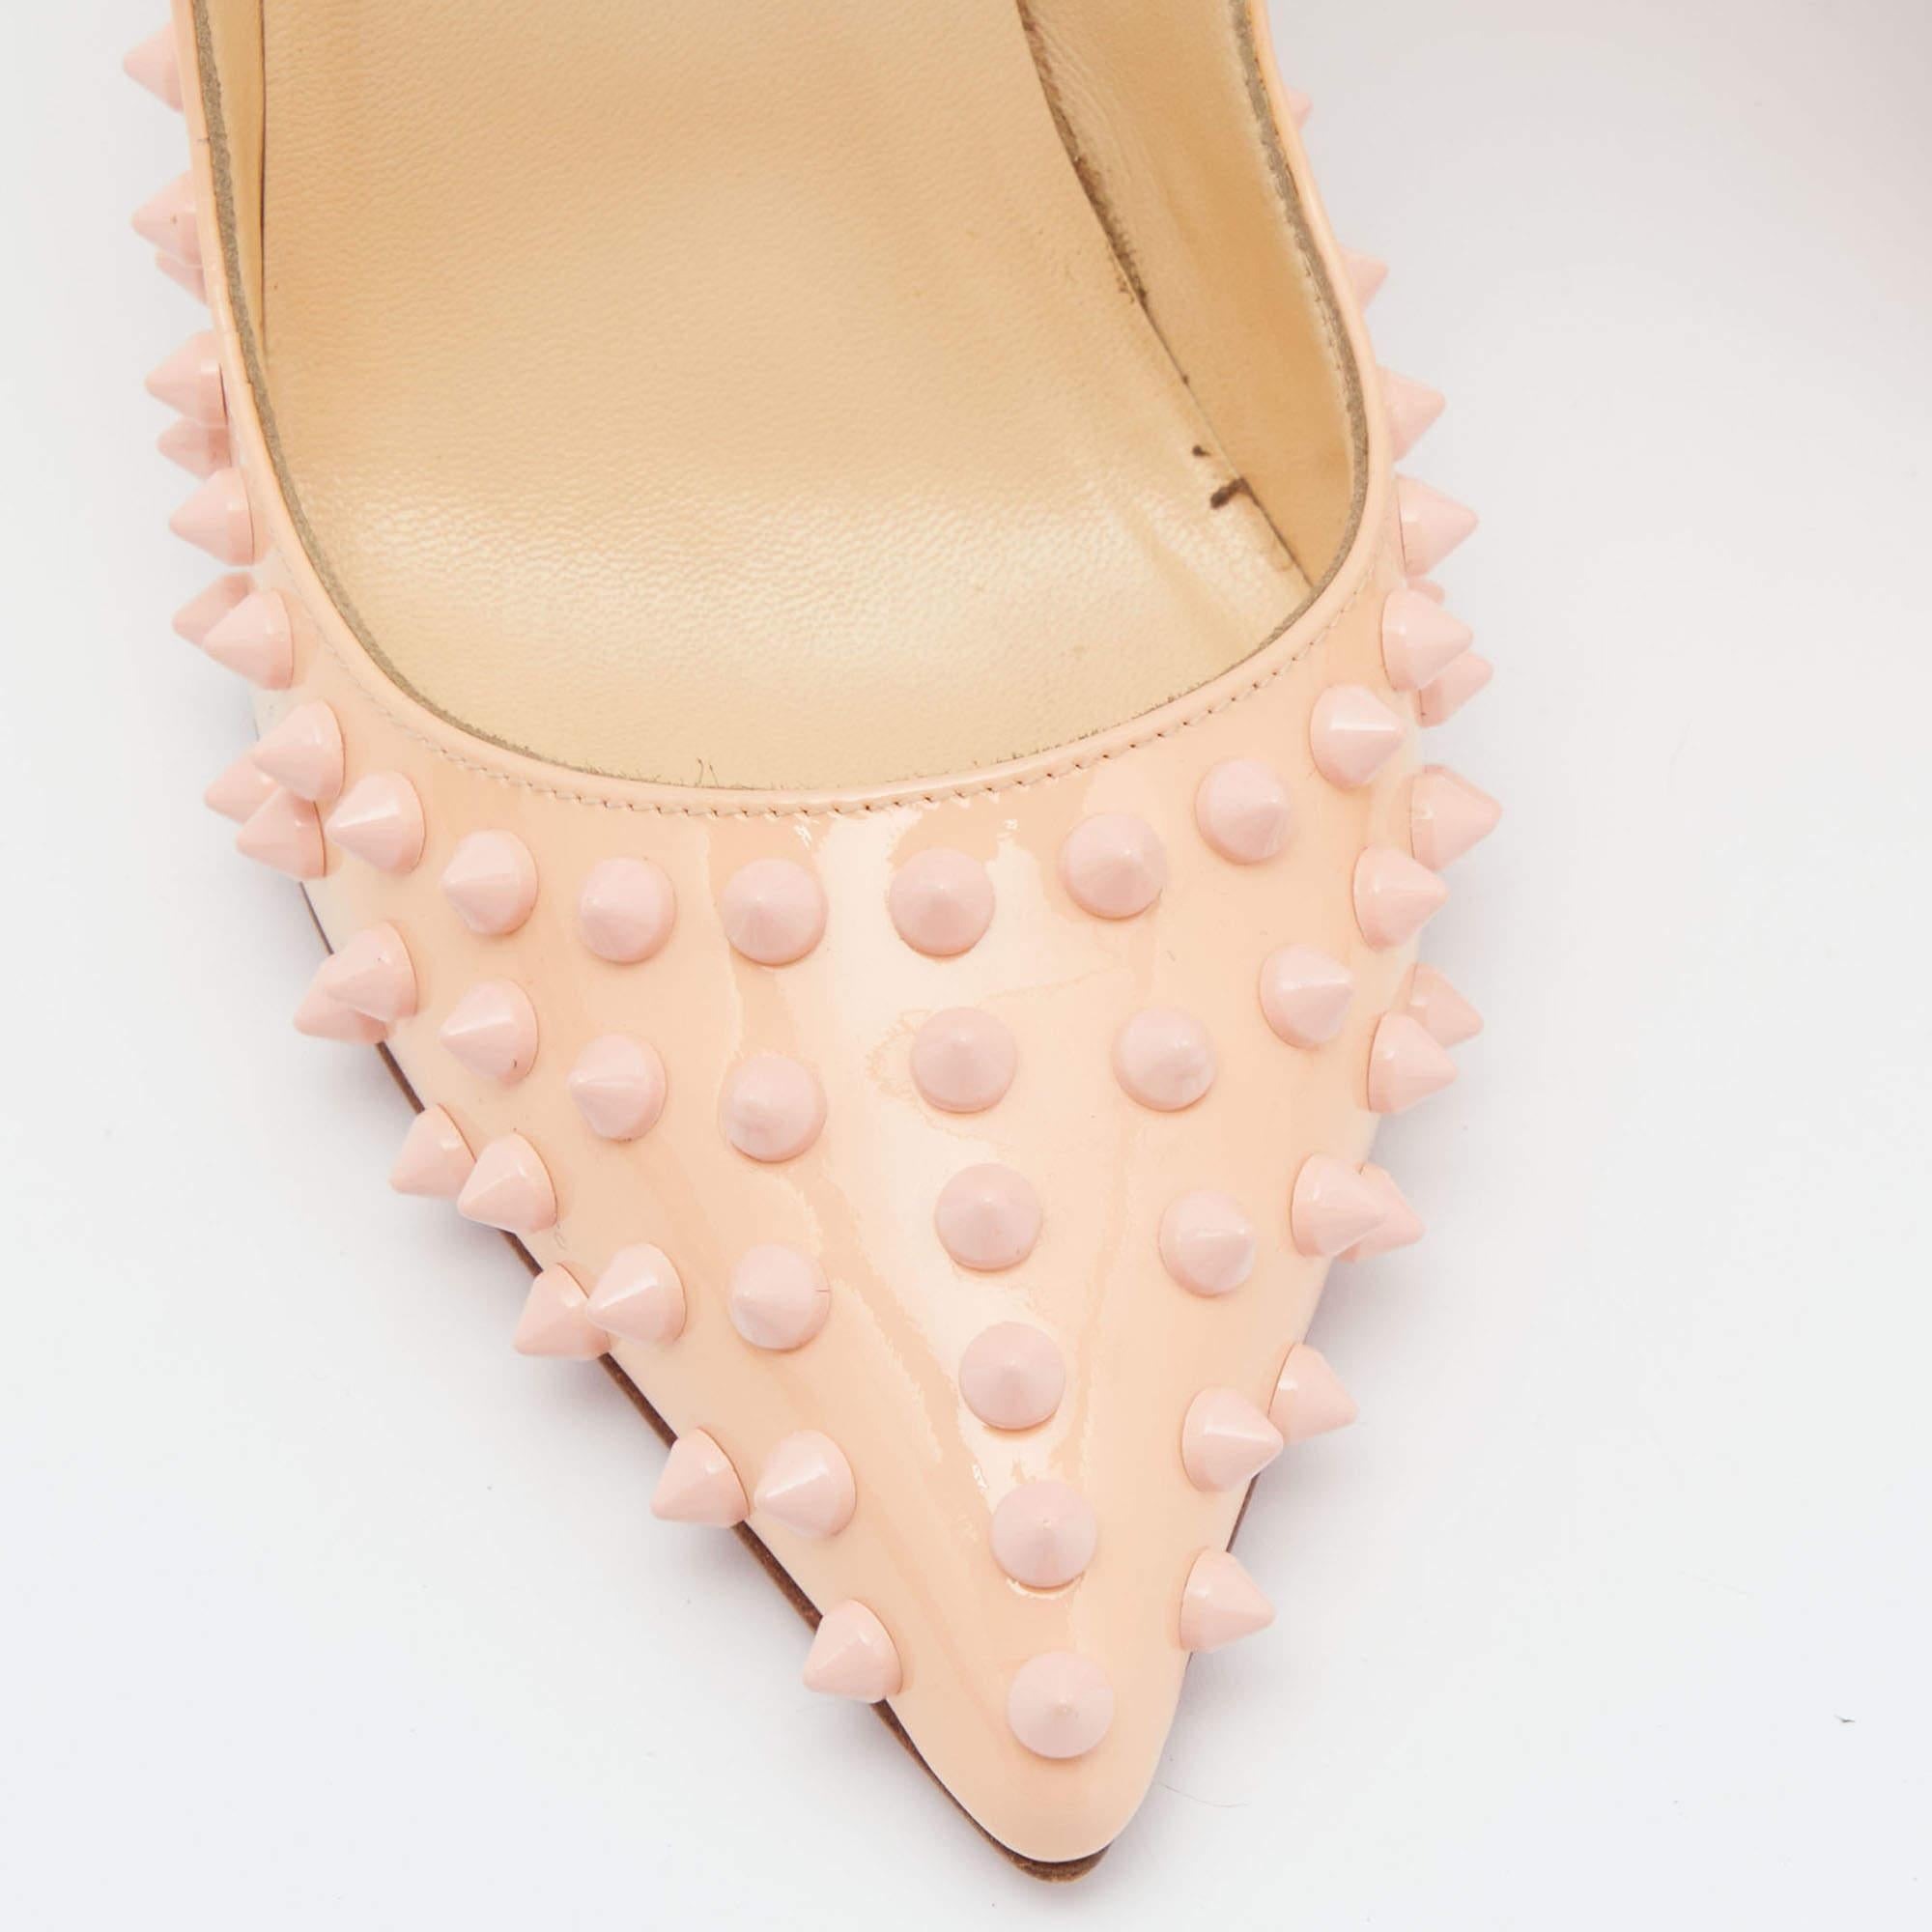 Christian Louboutin Peach Patent Leather Pigalle Spikes Pointed Toe Pumps Size 3 1